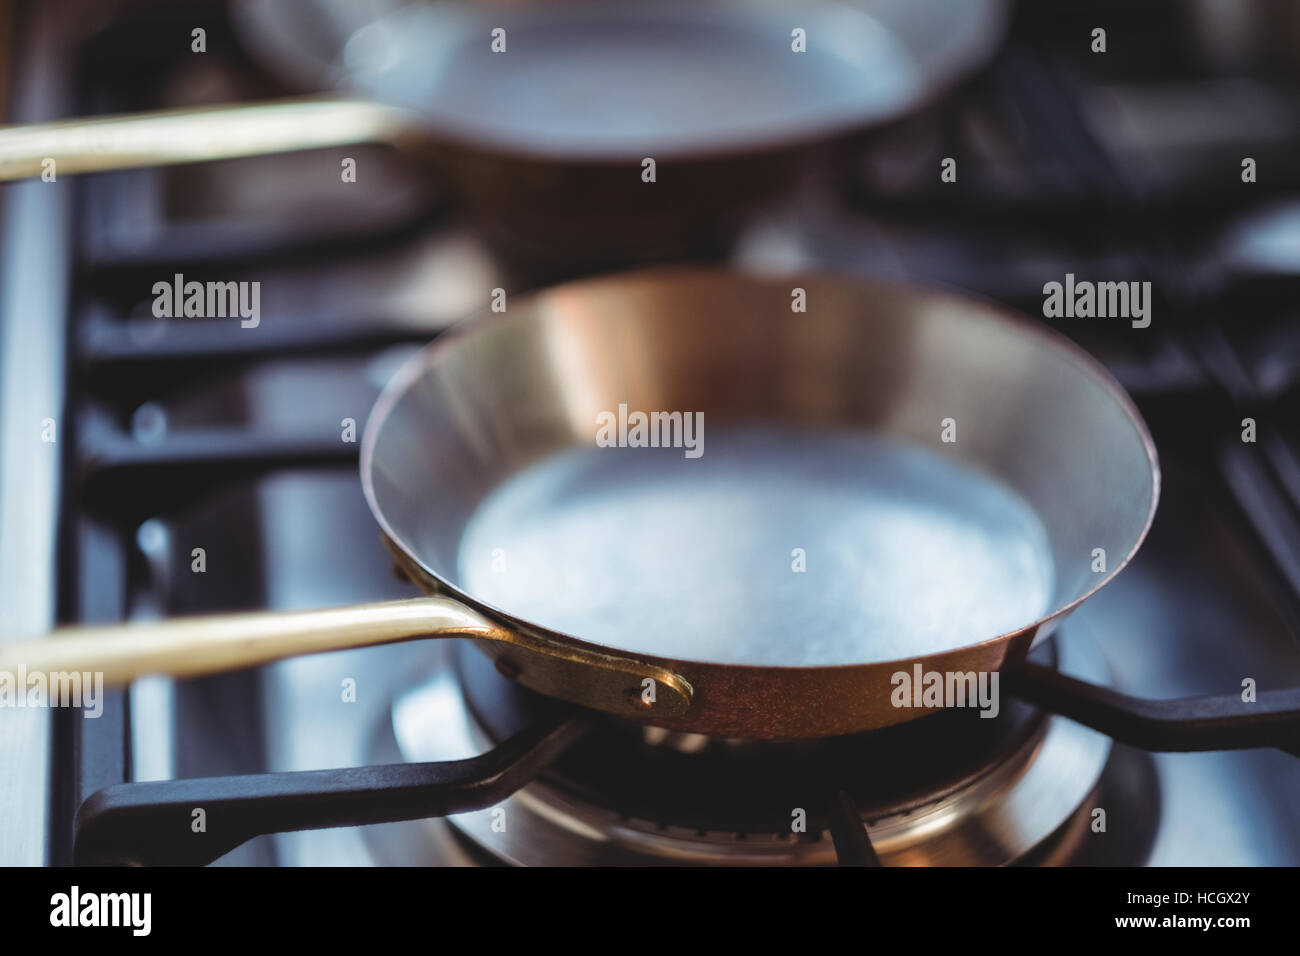 Close-up of frying pan on stove Stock Photo